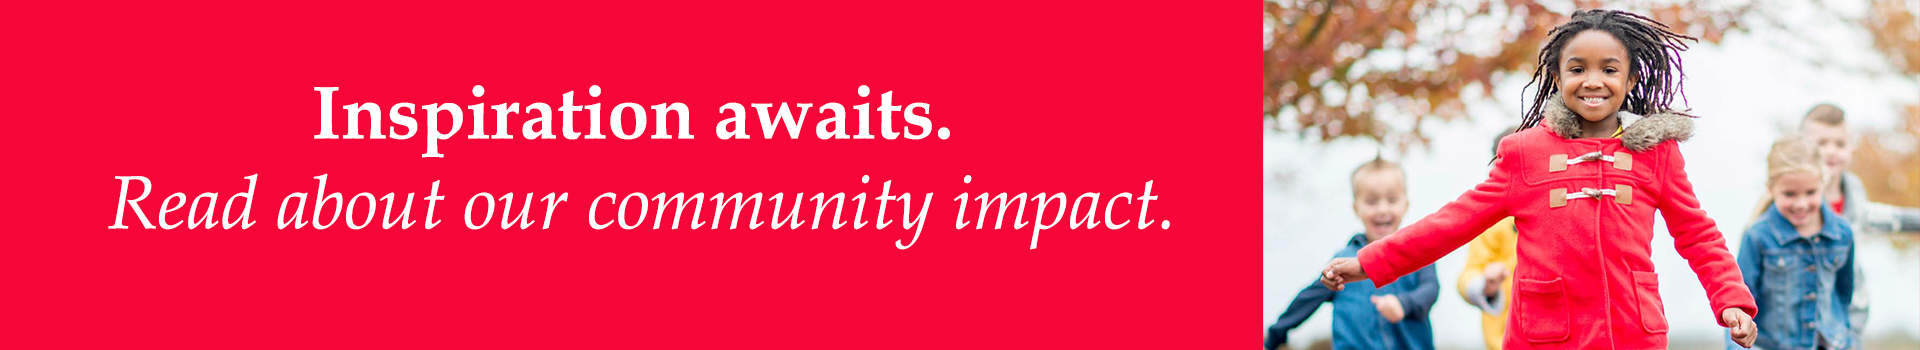 Read about our community impact